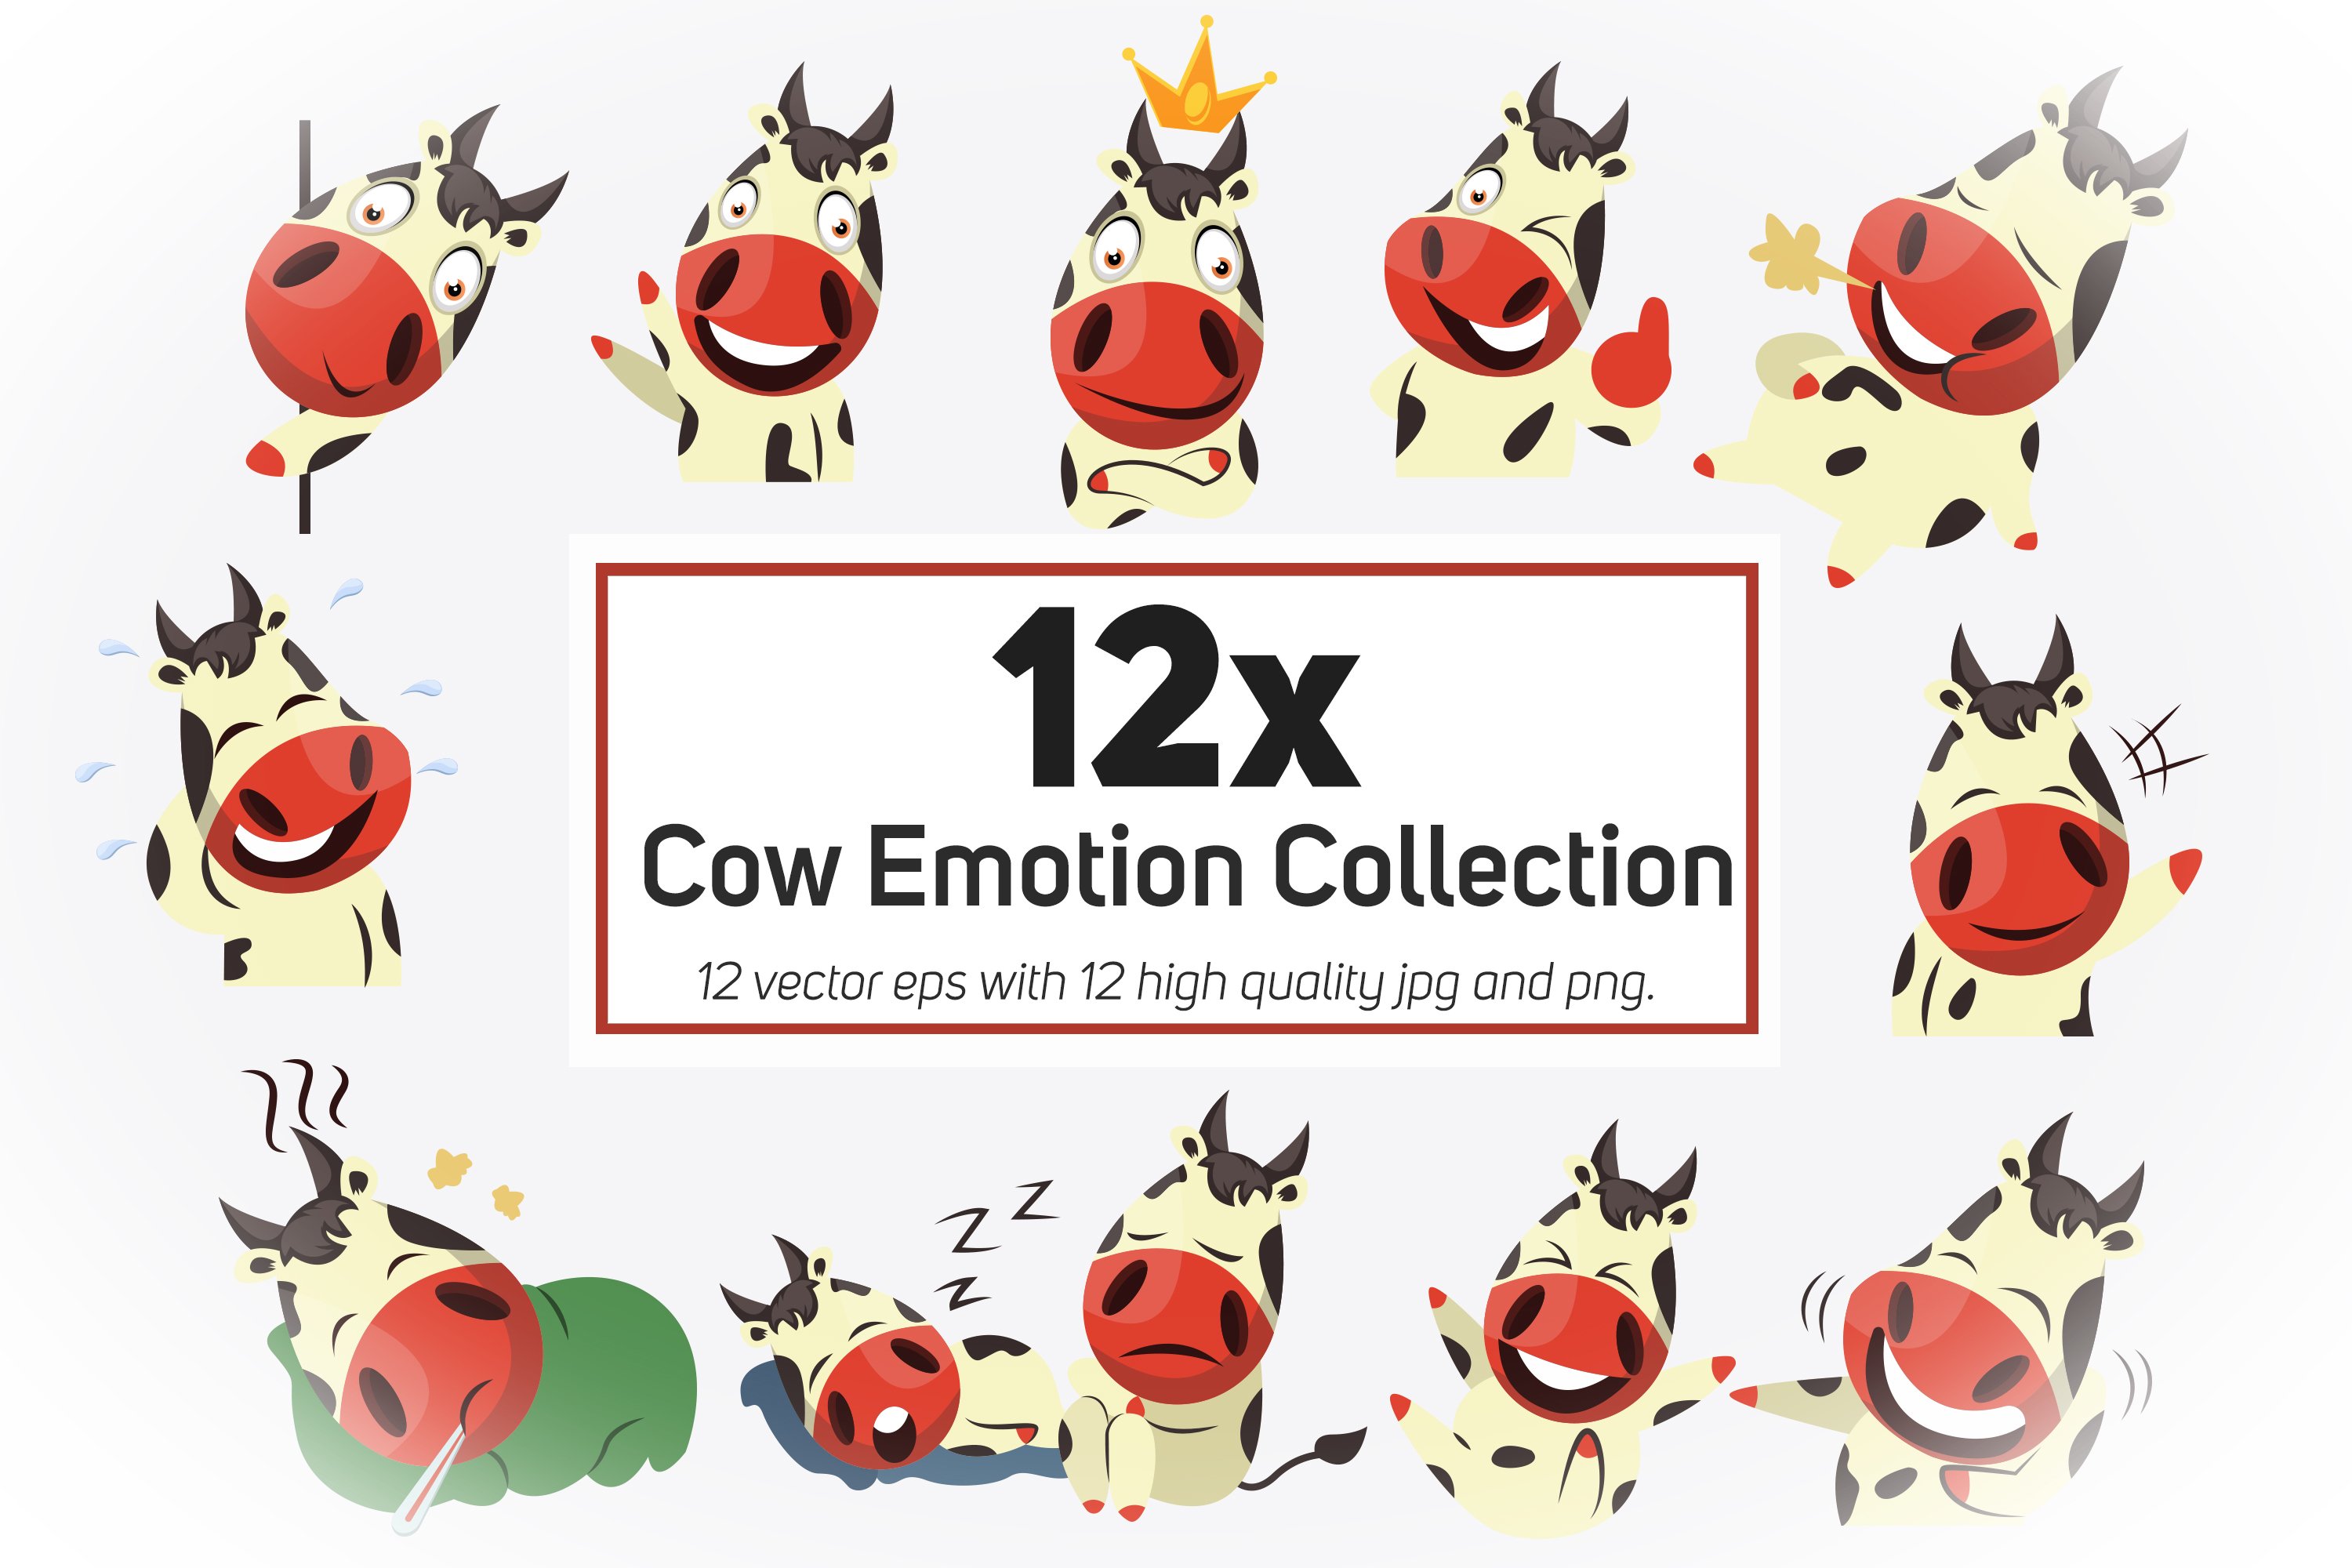 Cover with adorable images of cows emoticons.